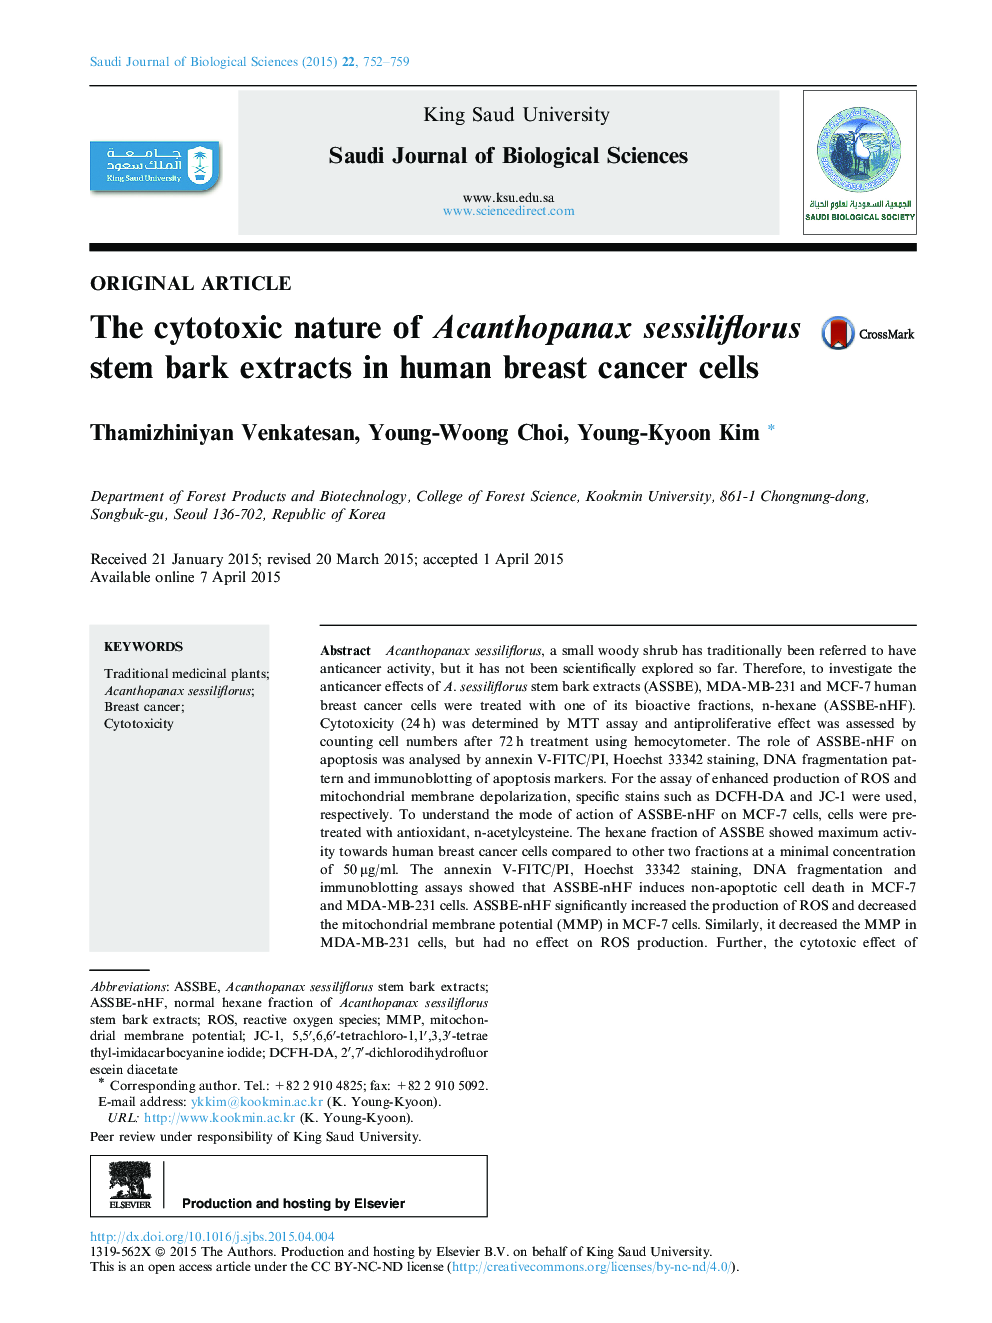 The cytotoxic nature of Acanthopanax sessiliflorus stem bark extracts in human breast cancer cells 